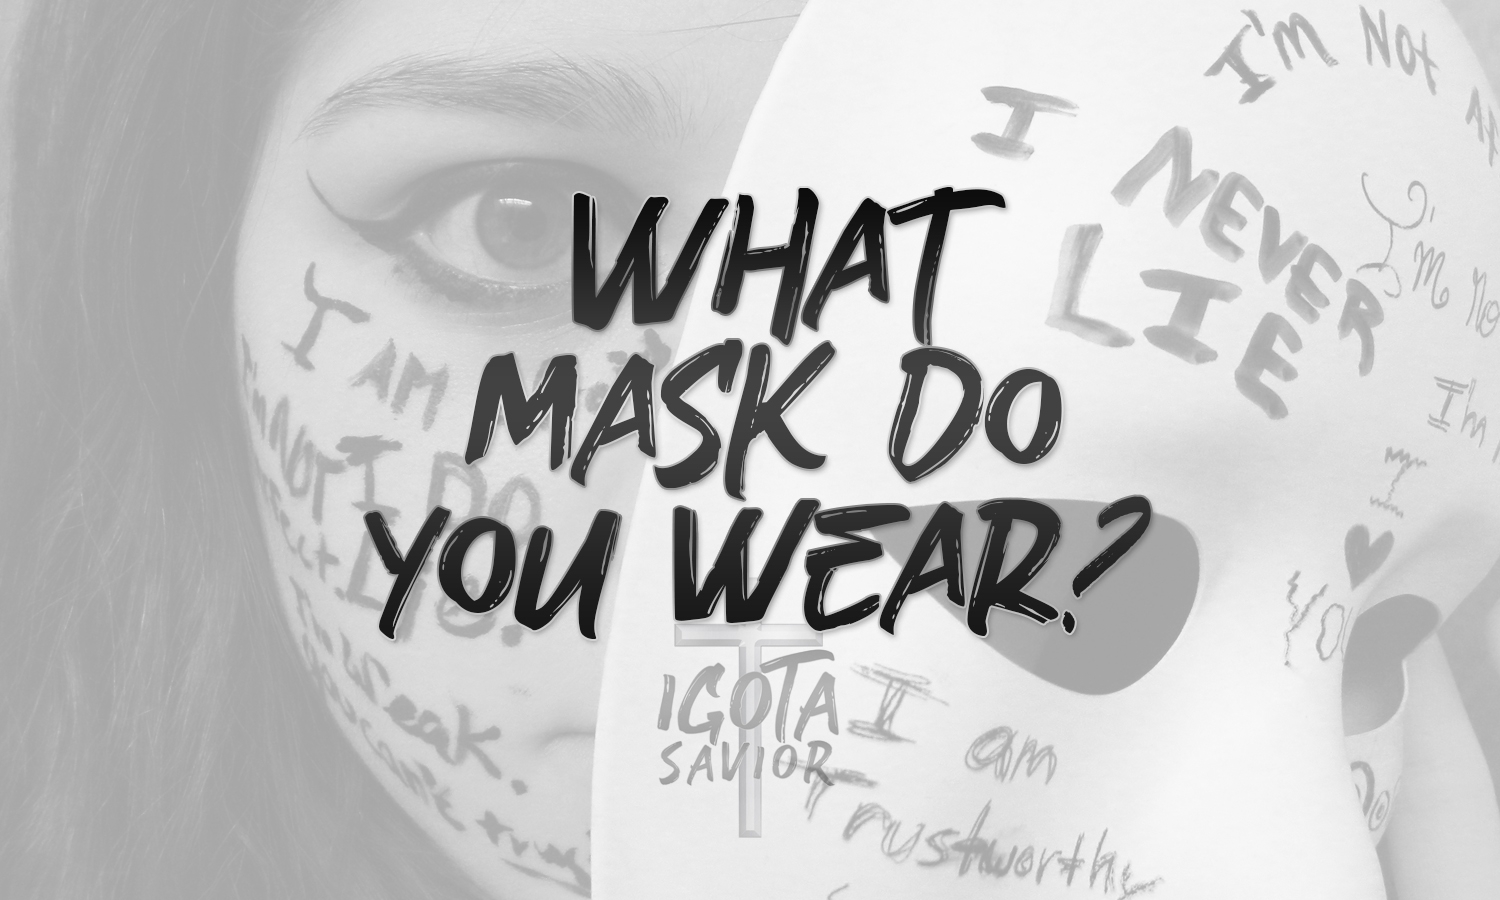 What Mask Do You Wear?